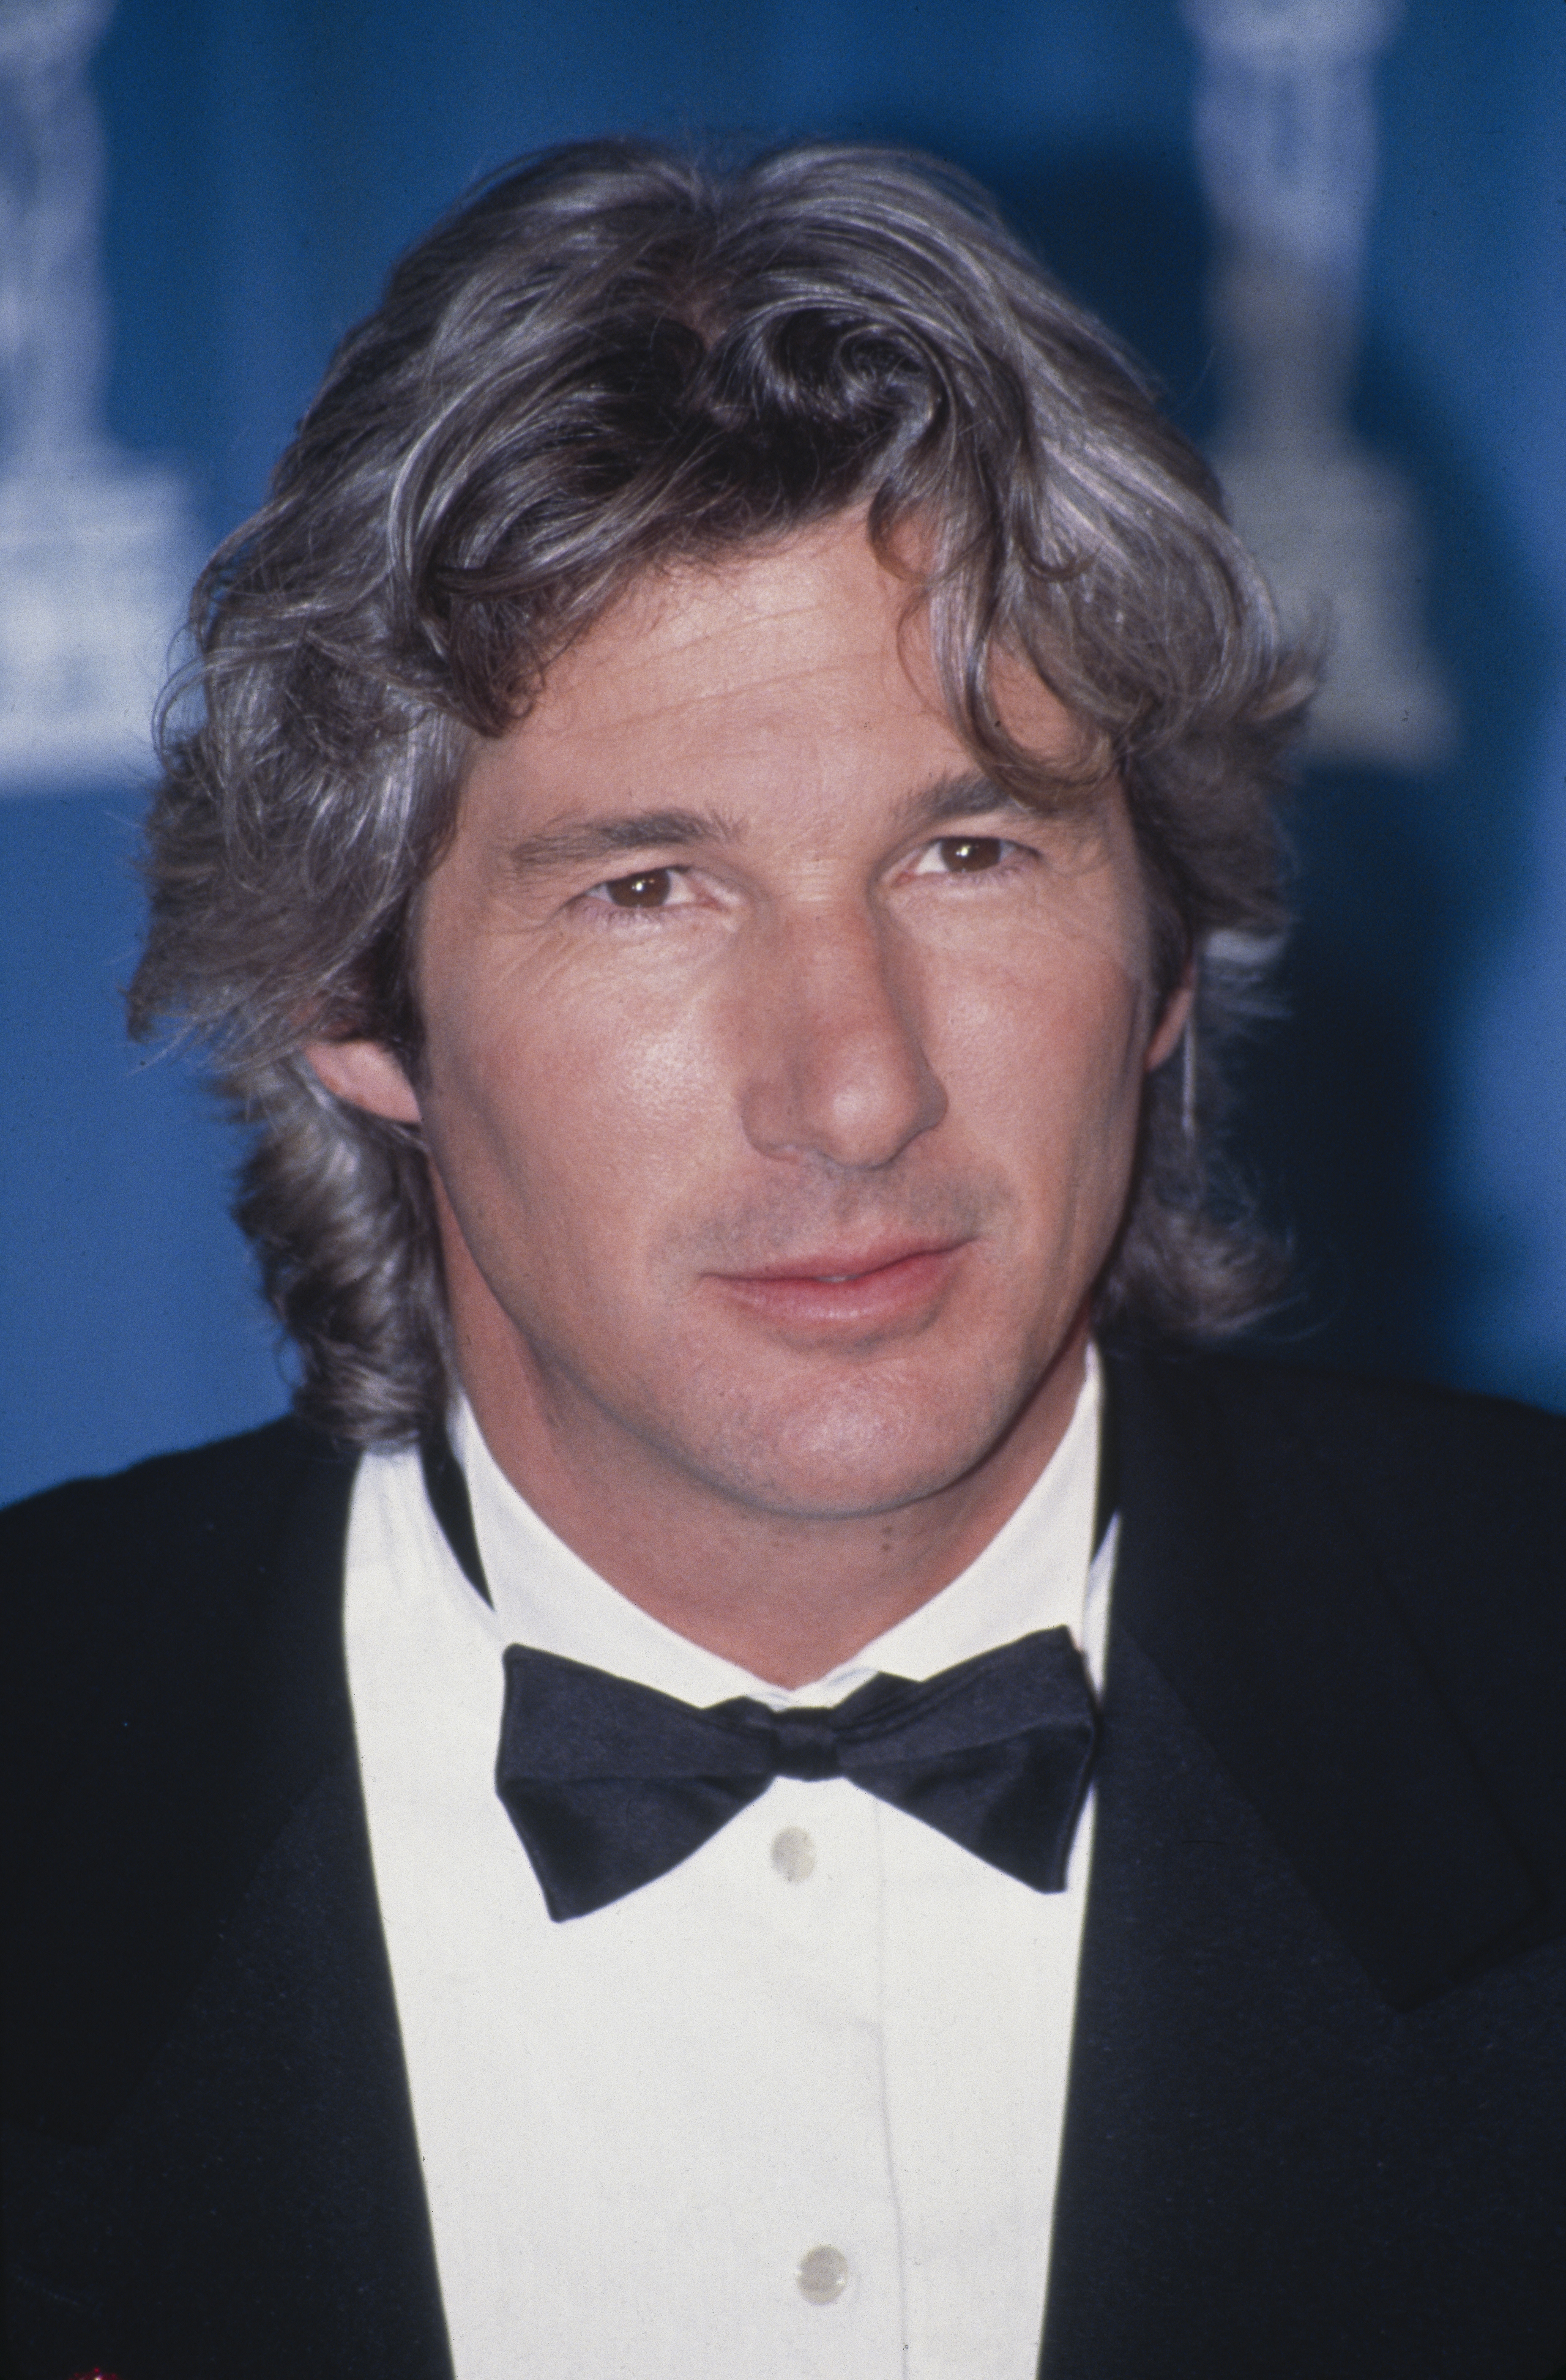 Richard Gere at the 65th Annual Academy Awards in Los Angeles, California on March 29, 1993 | Source: Getty Images